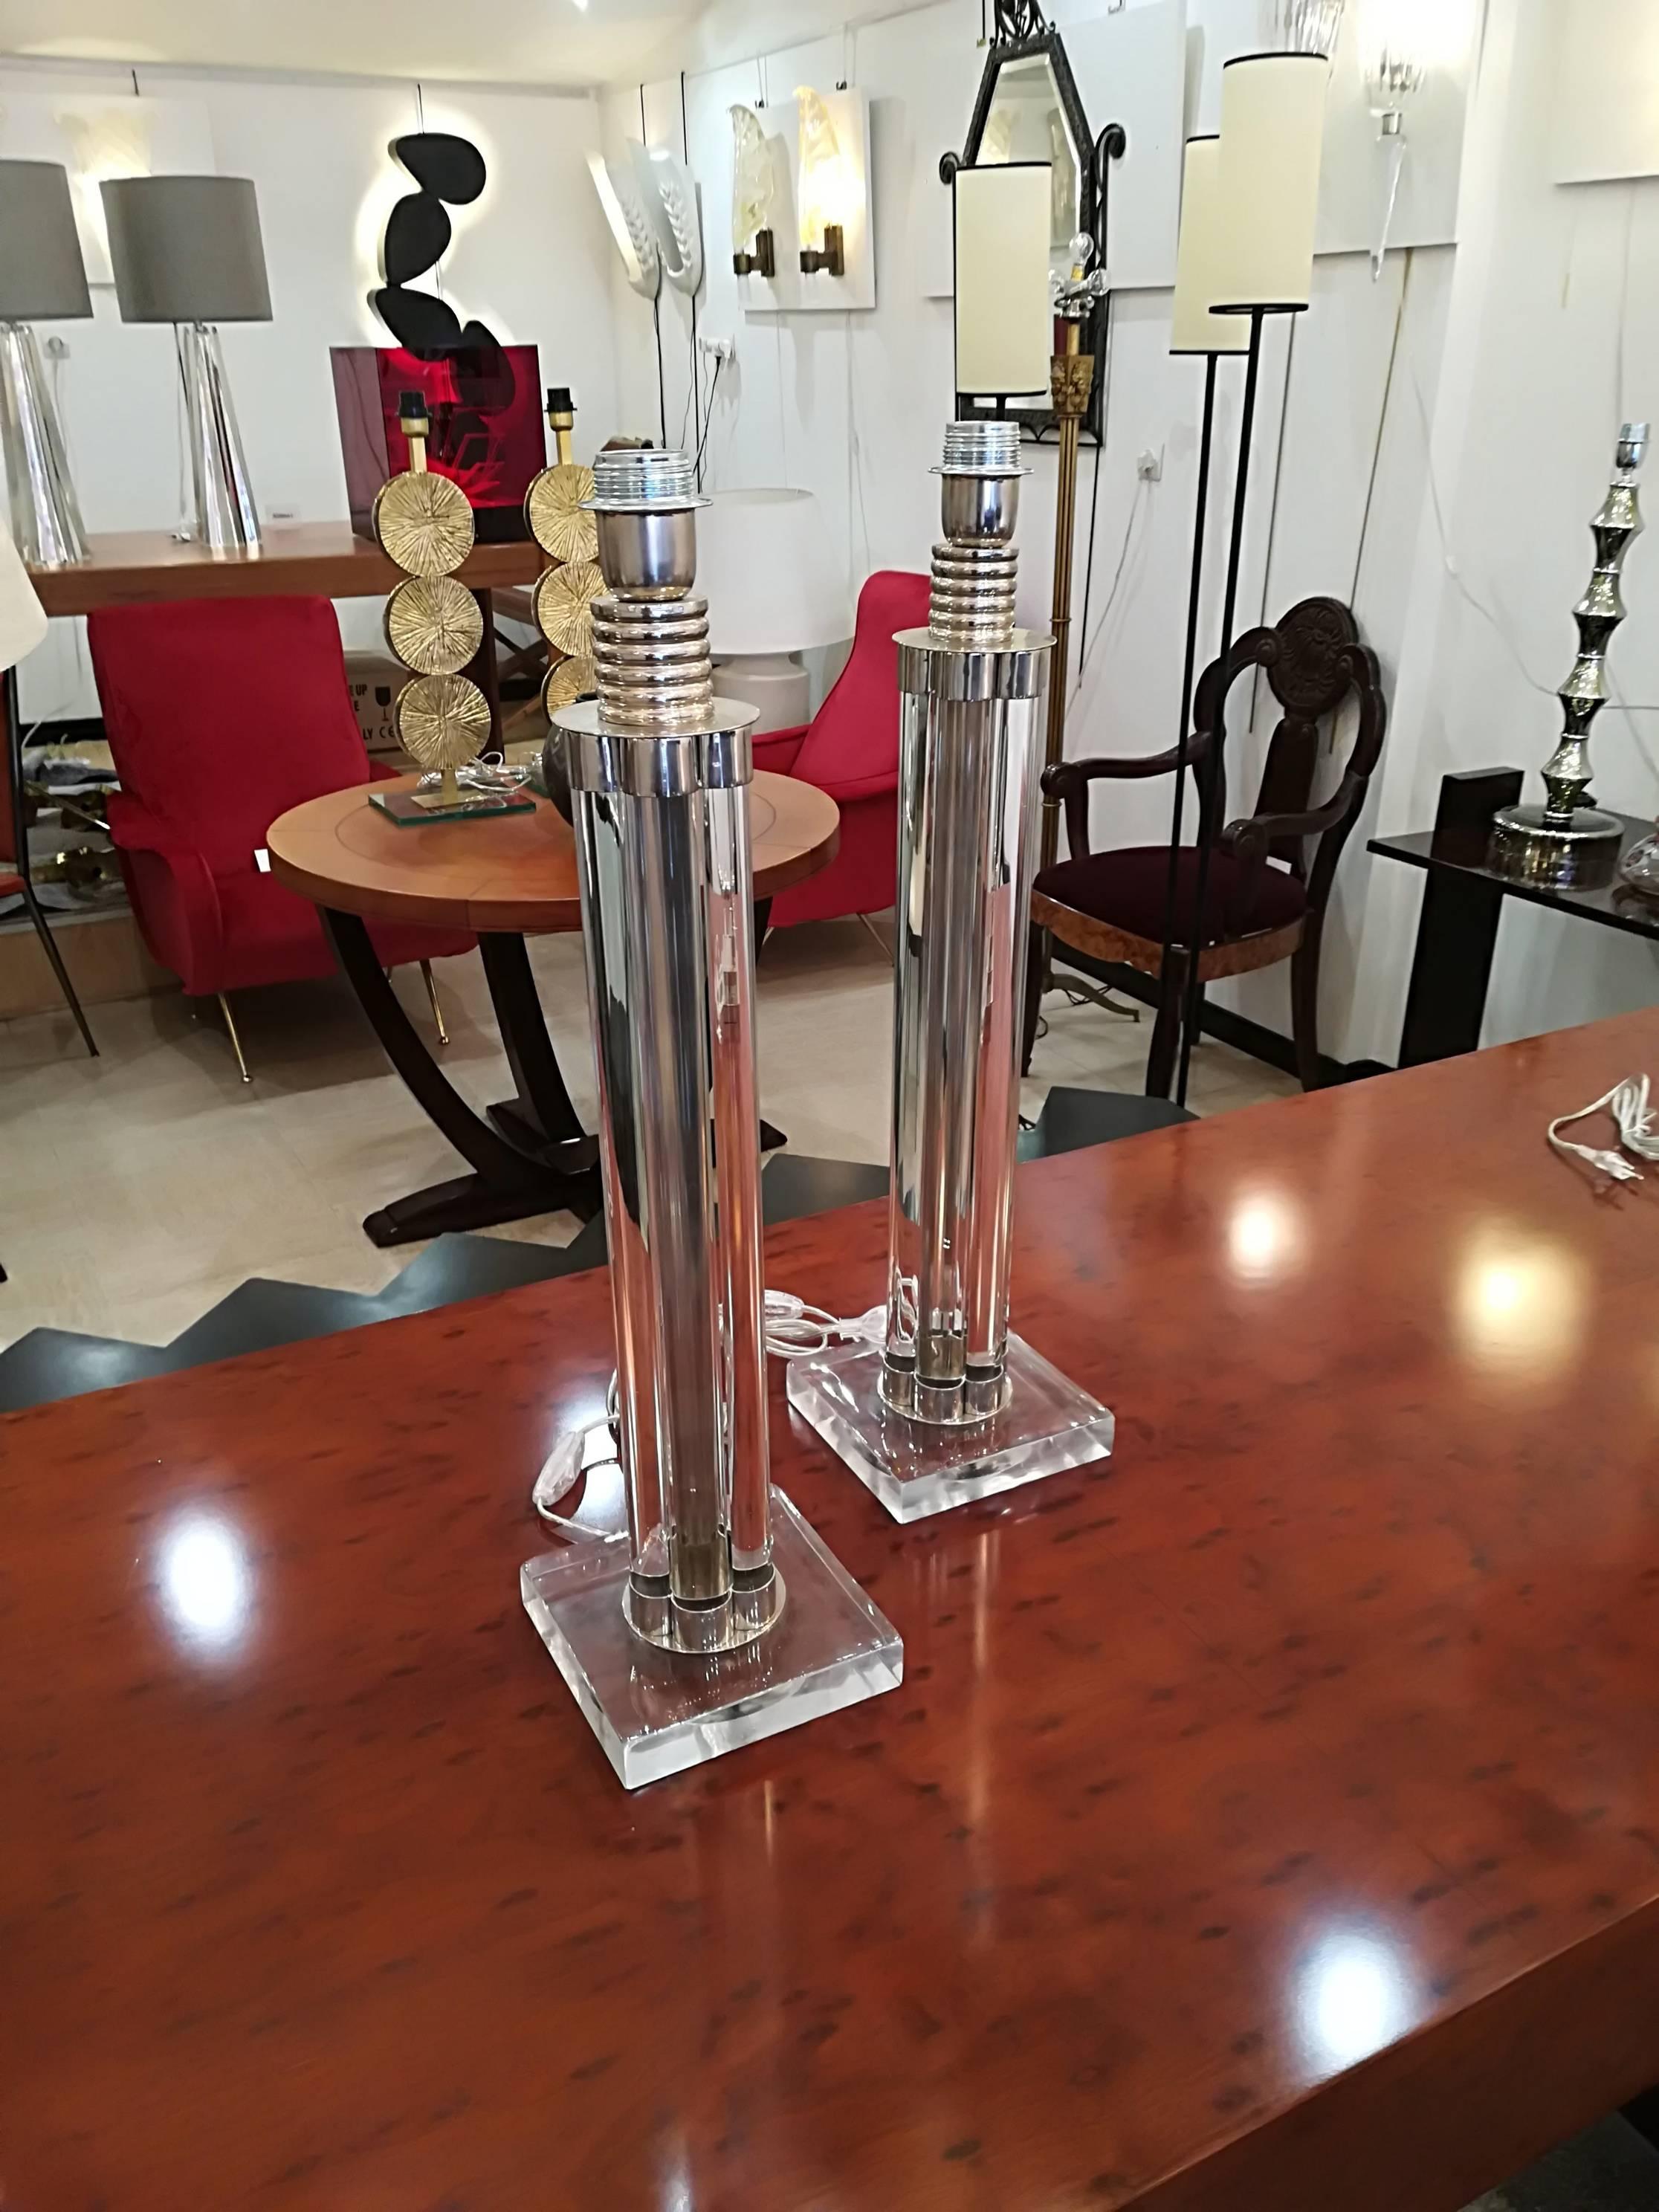 Elegant Pair of Glass and Nickel Plated Metal Table Lamps, from Italy.
Base : 16x16cm